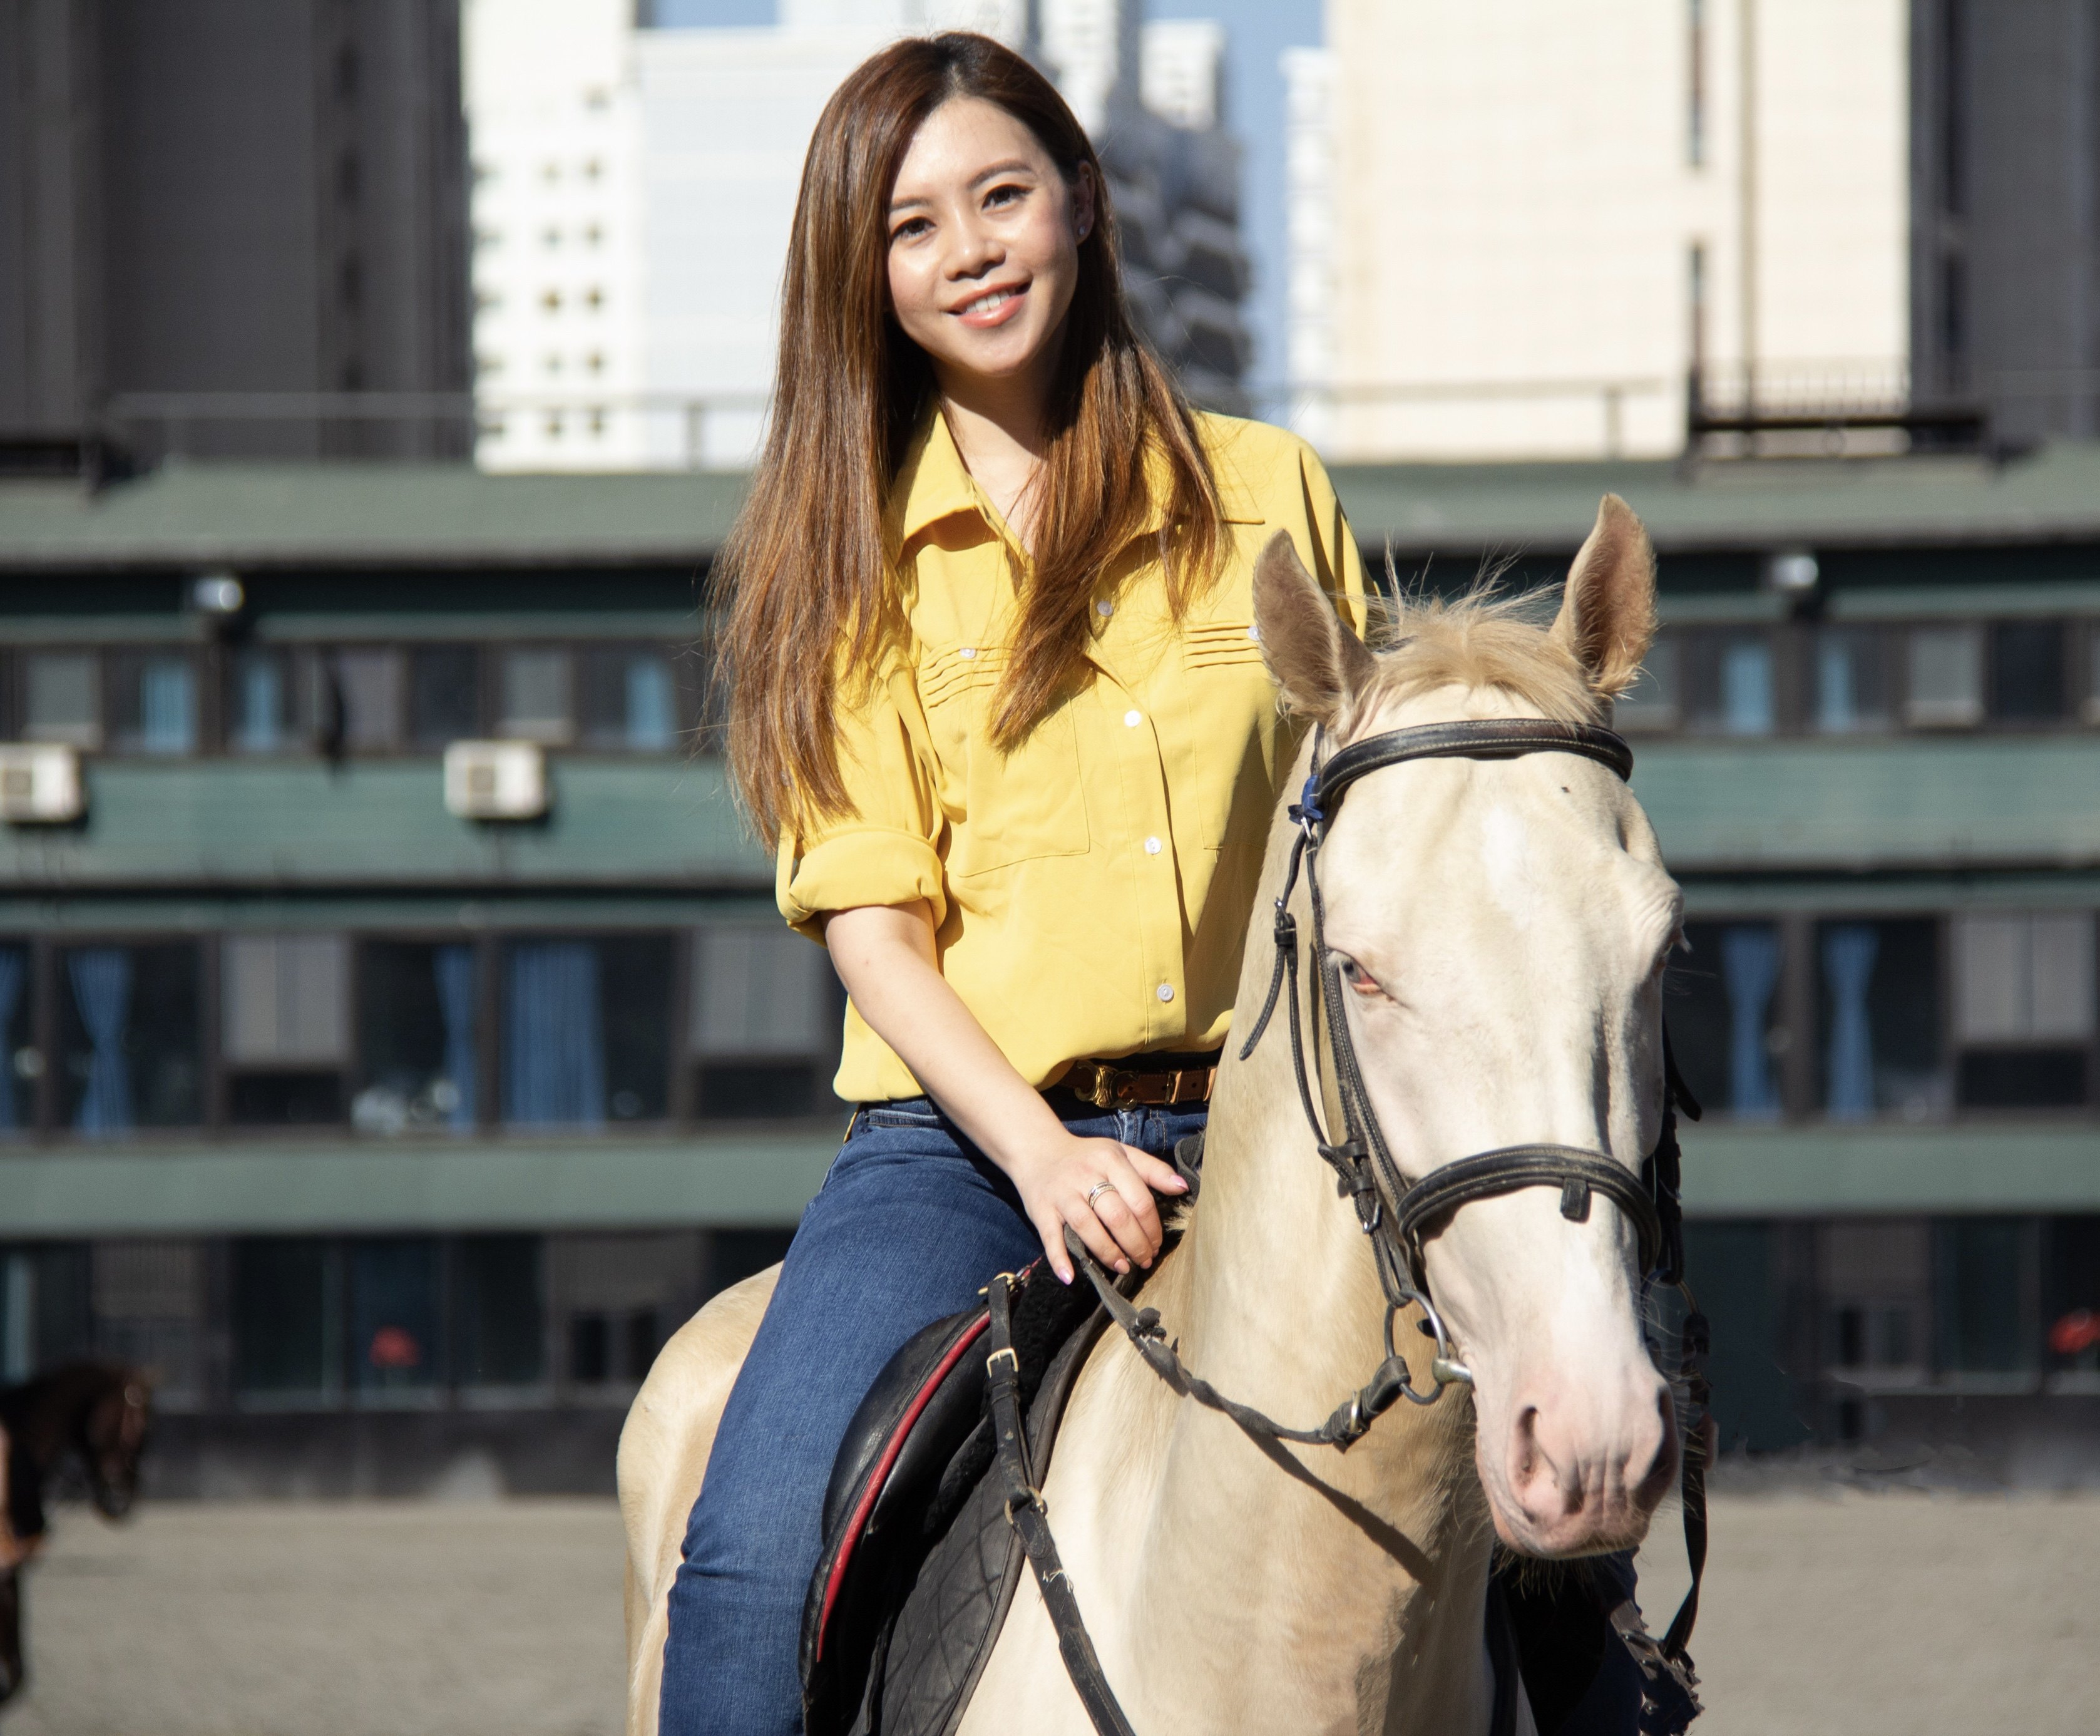 BoBo Poon is an equestrian-entrepreneur who has a vision of taking the sport to new heights in Asia. Photo: Handout